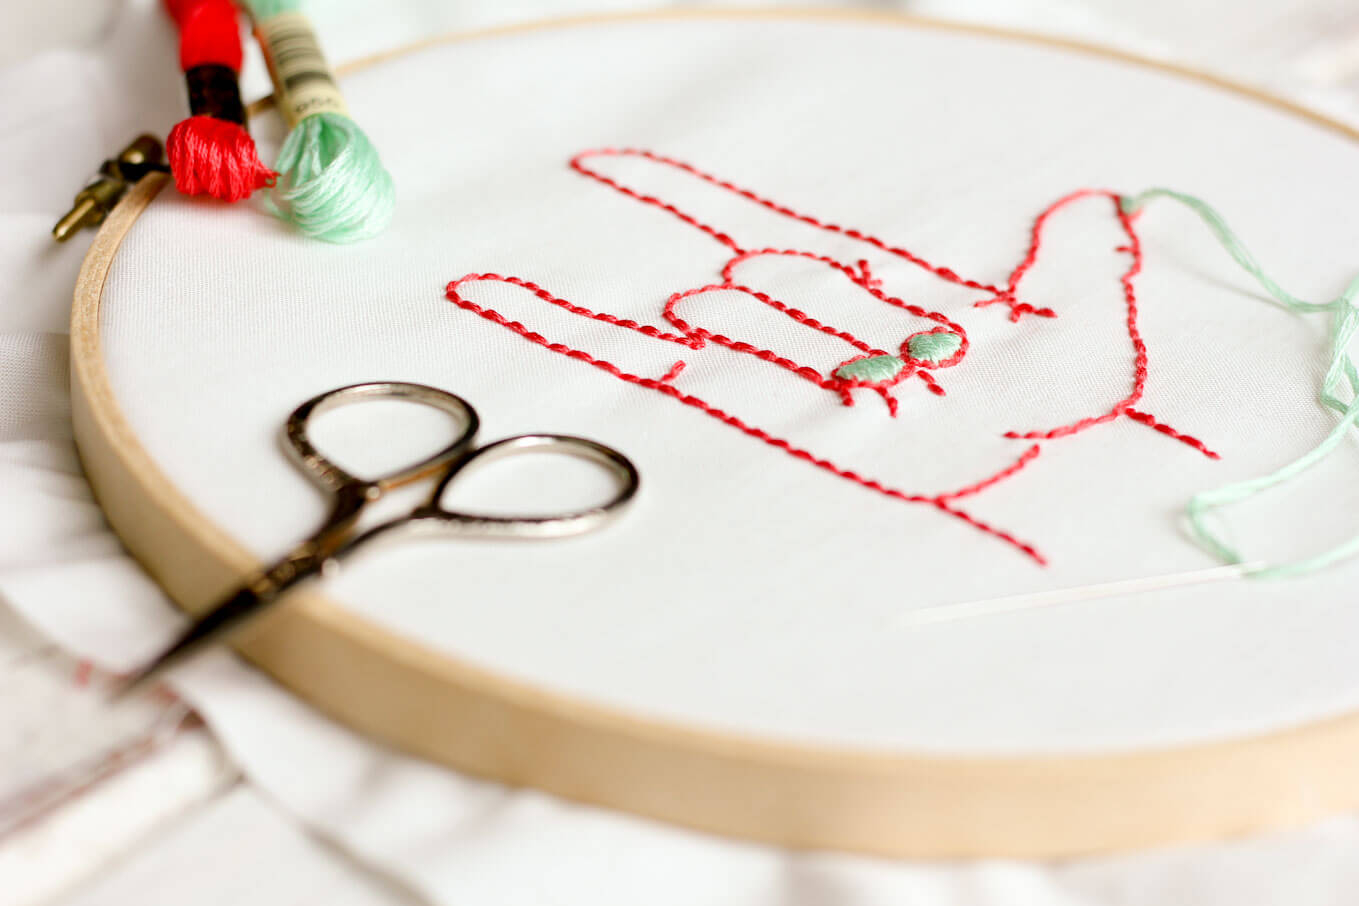 Embroidery Free Patterns I Love You Free Embroidery Pattern Make Do Crew